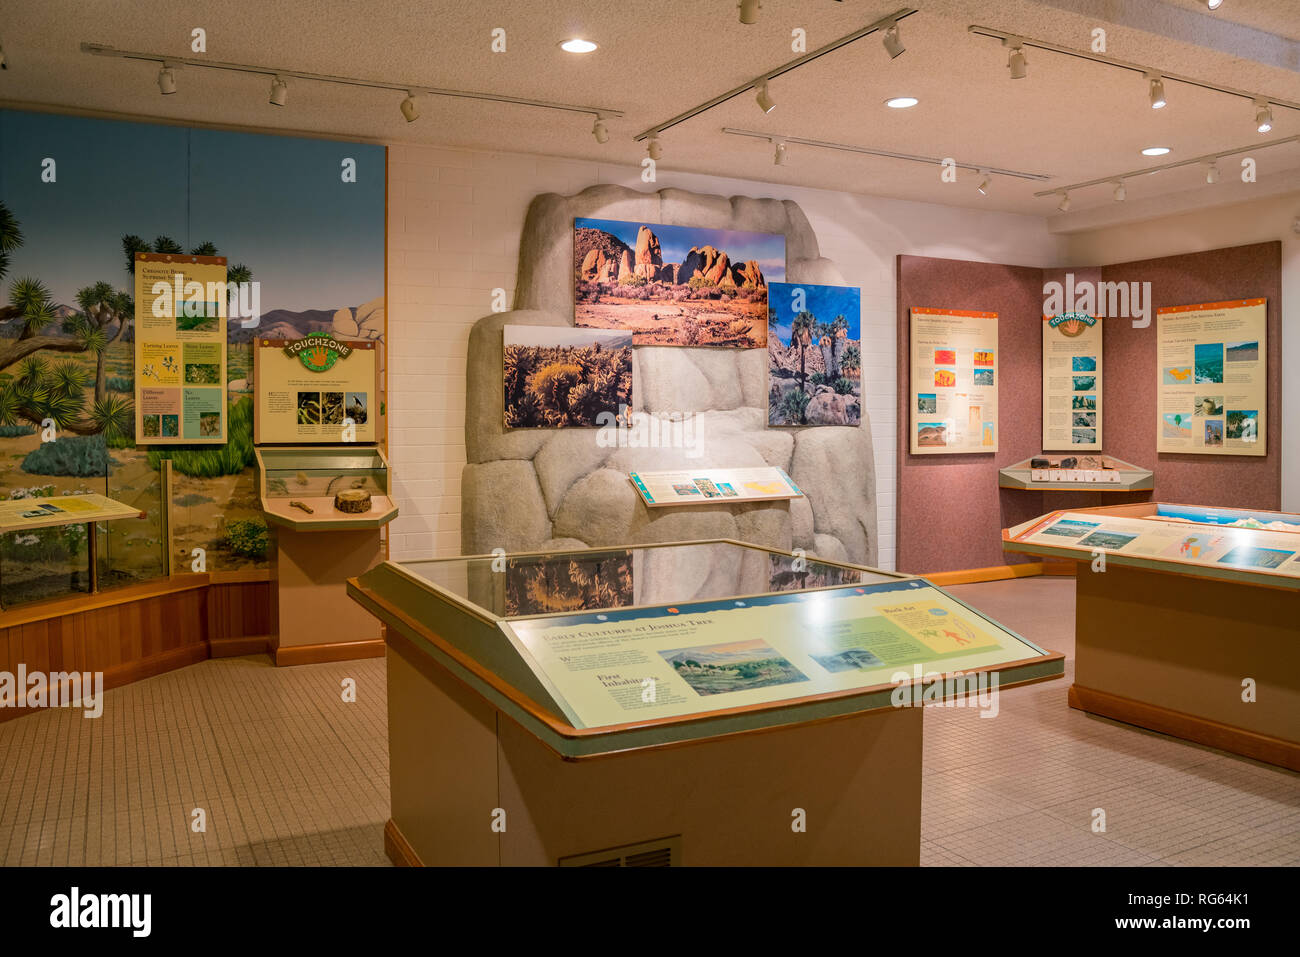 California, MAR 10: Interior view of the Joshua Tree National Park Visitor Center on MAR 10, 2018 at California, United States Stock Photo